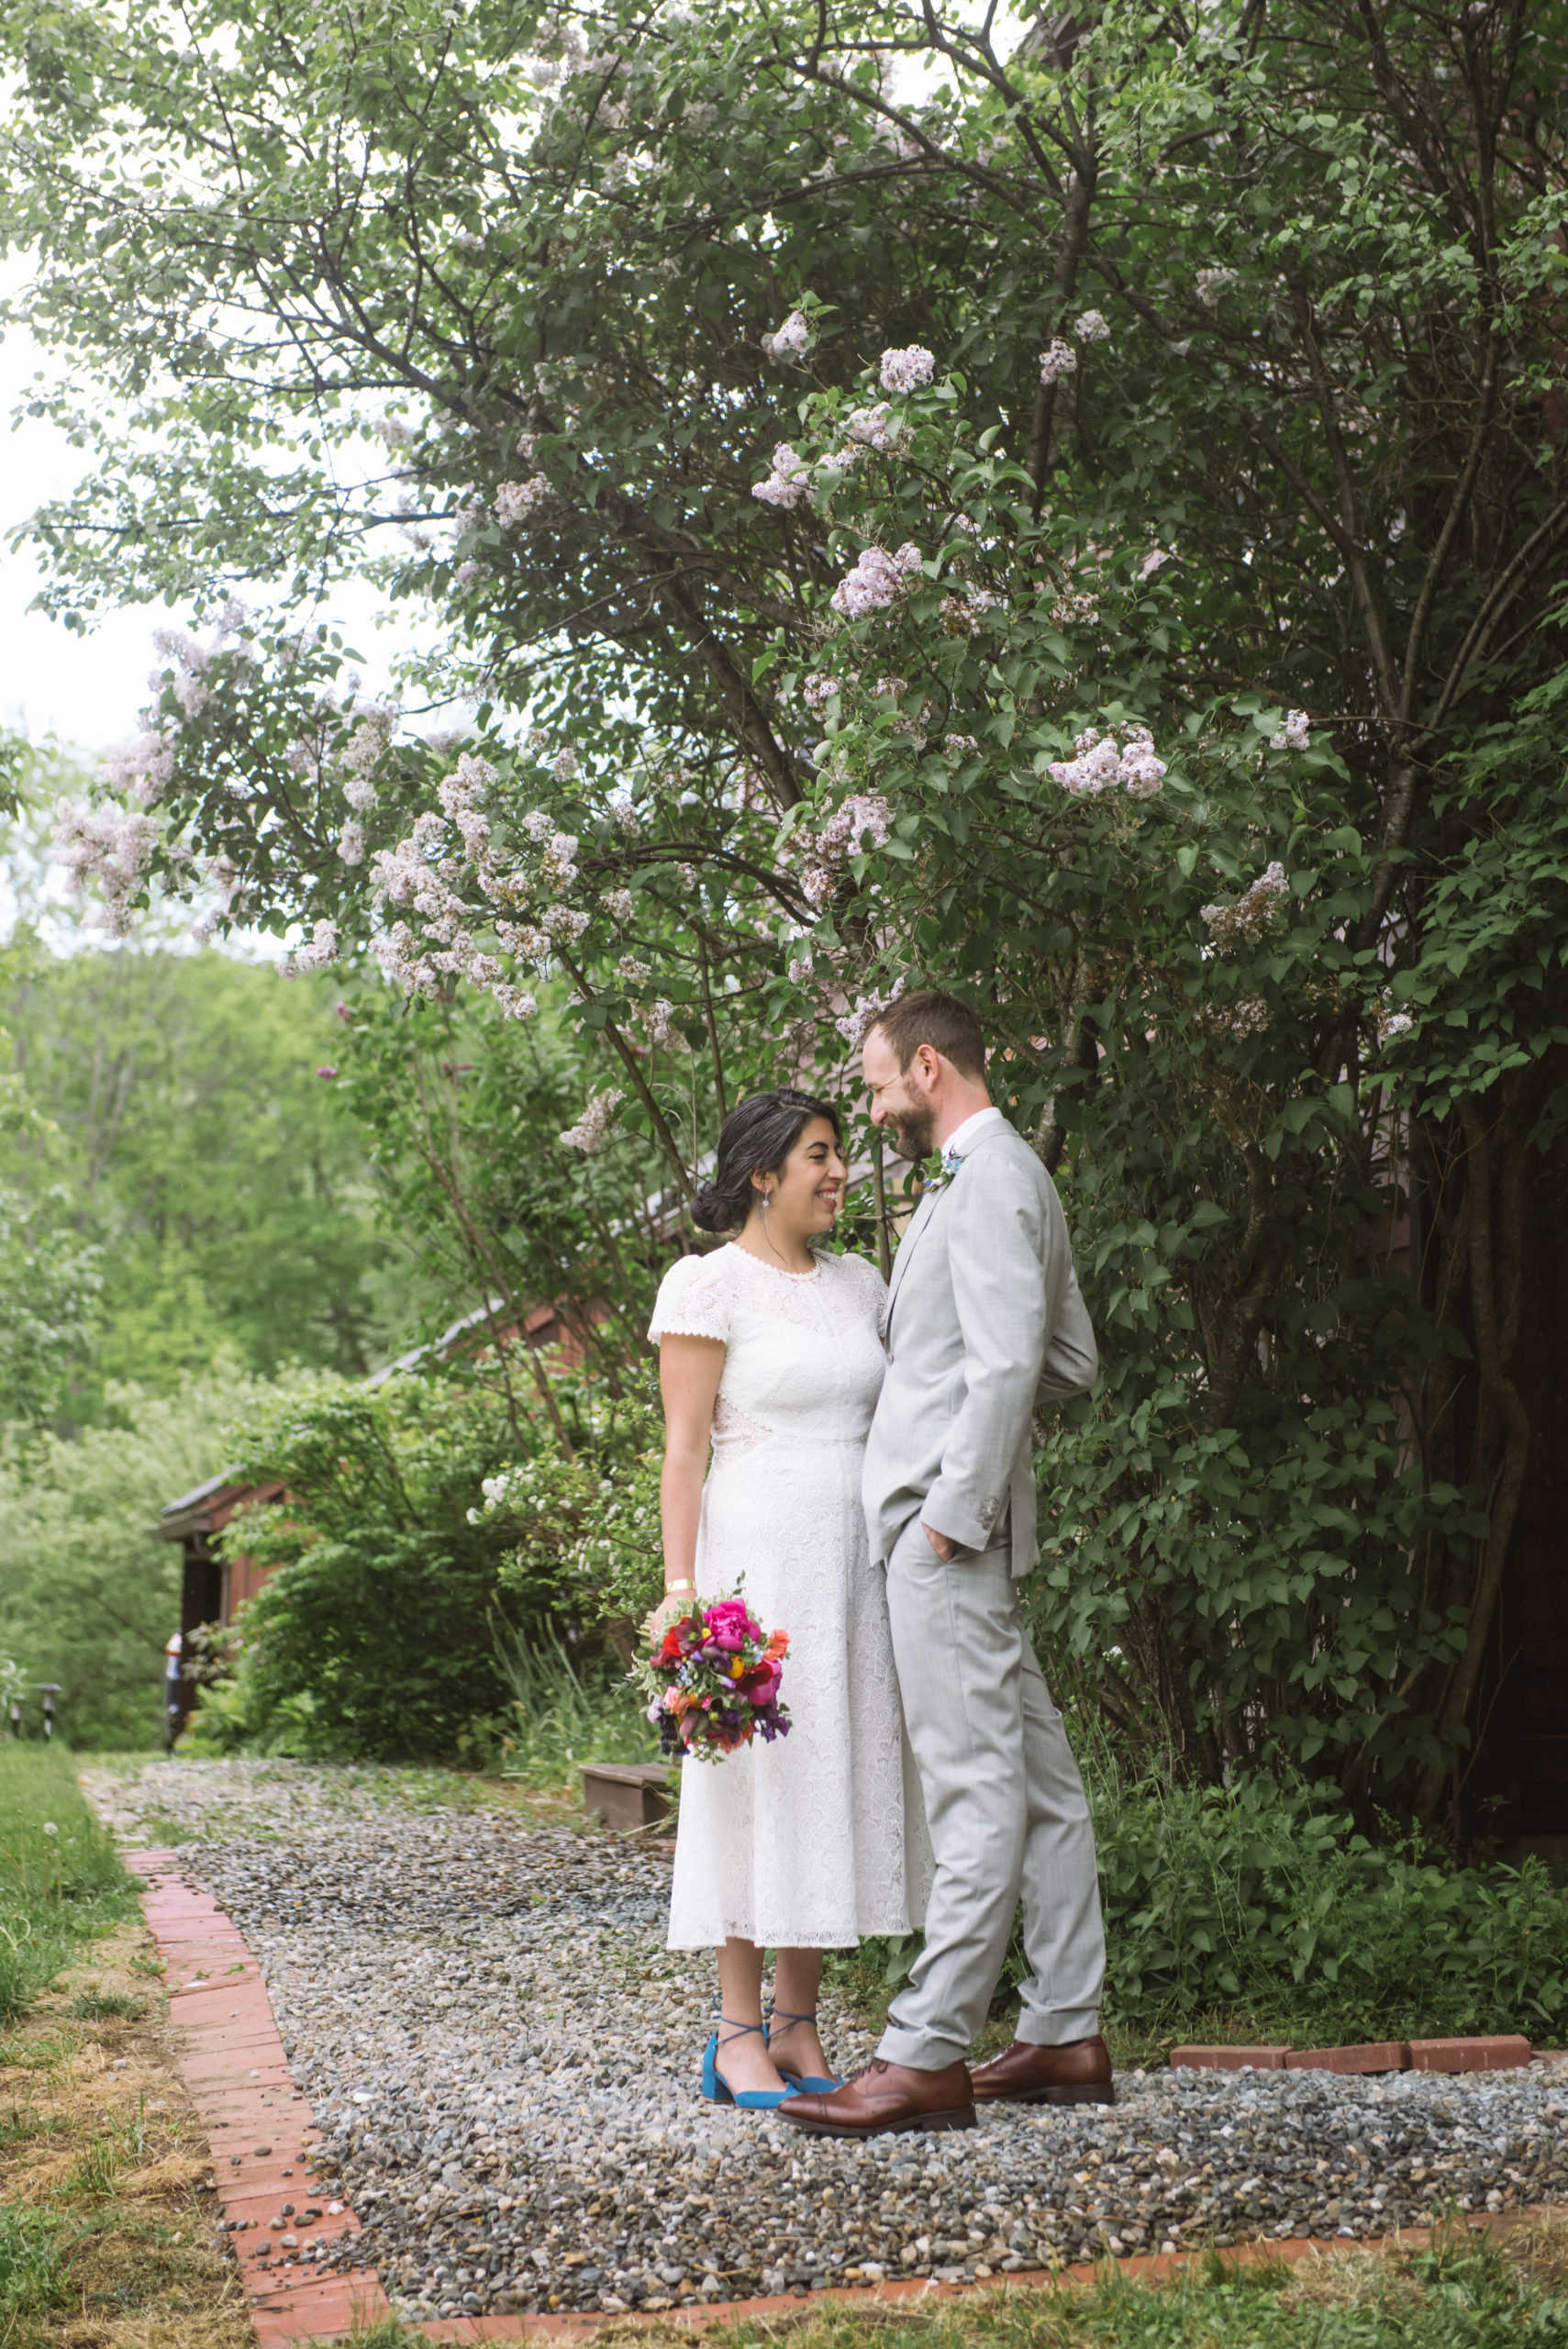 Bride and groom standing facing one another. Both have their eyes closed in happiness and are smiling. The bride is holding her multi-colored bouquet in her right hand and the groom's left hand is in his pocket. They are standing on a gravel pathway in front of flowering greenery.